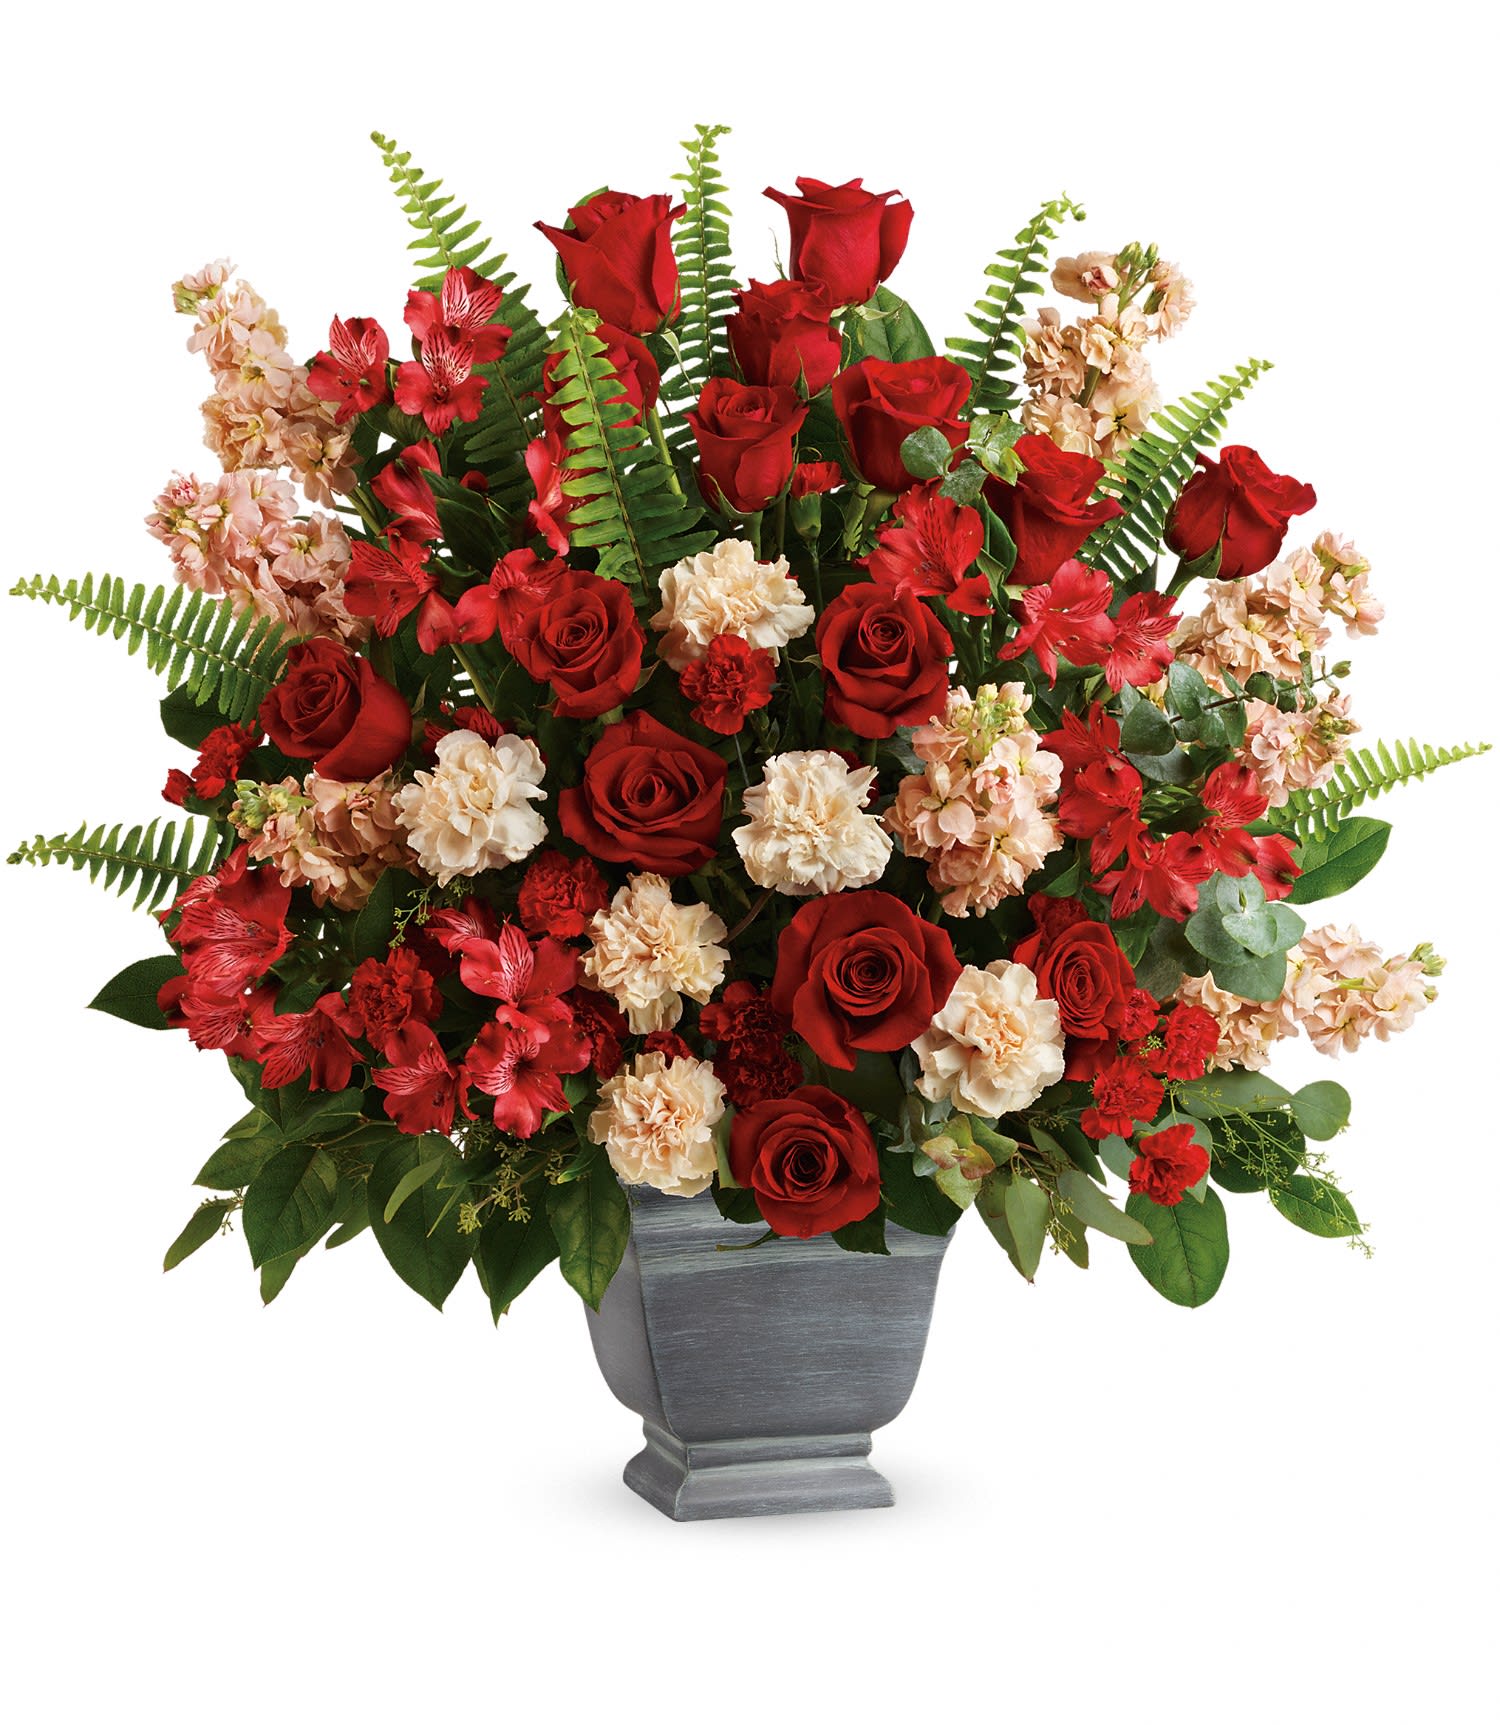 Bold Tribute Bouquet Deluxe - A bold expression of your deepest condolences, this elegant mix of red and peach blooms in a large container brings strength and comfort with blooms of Red Roses,Peach Stock,Peach Carnations,and Red Mini Carnations.